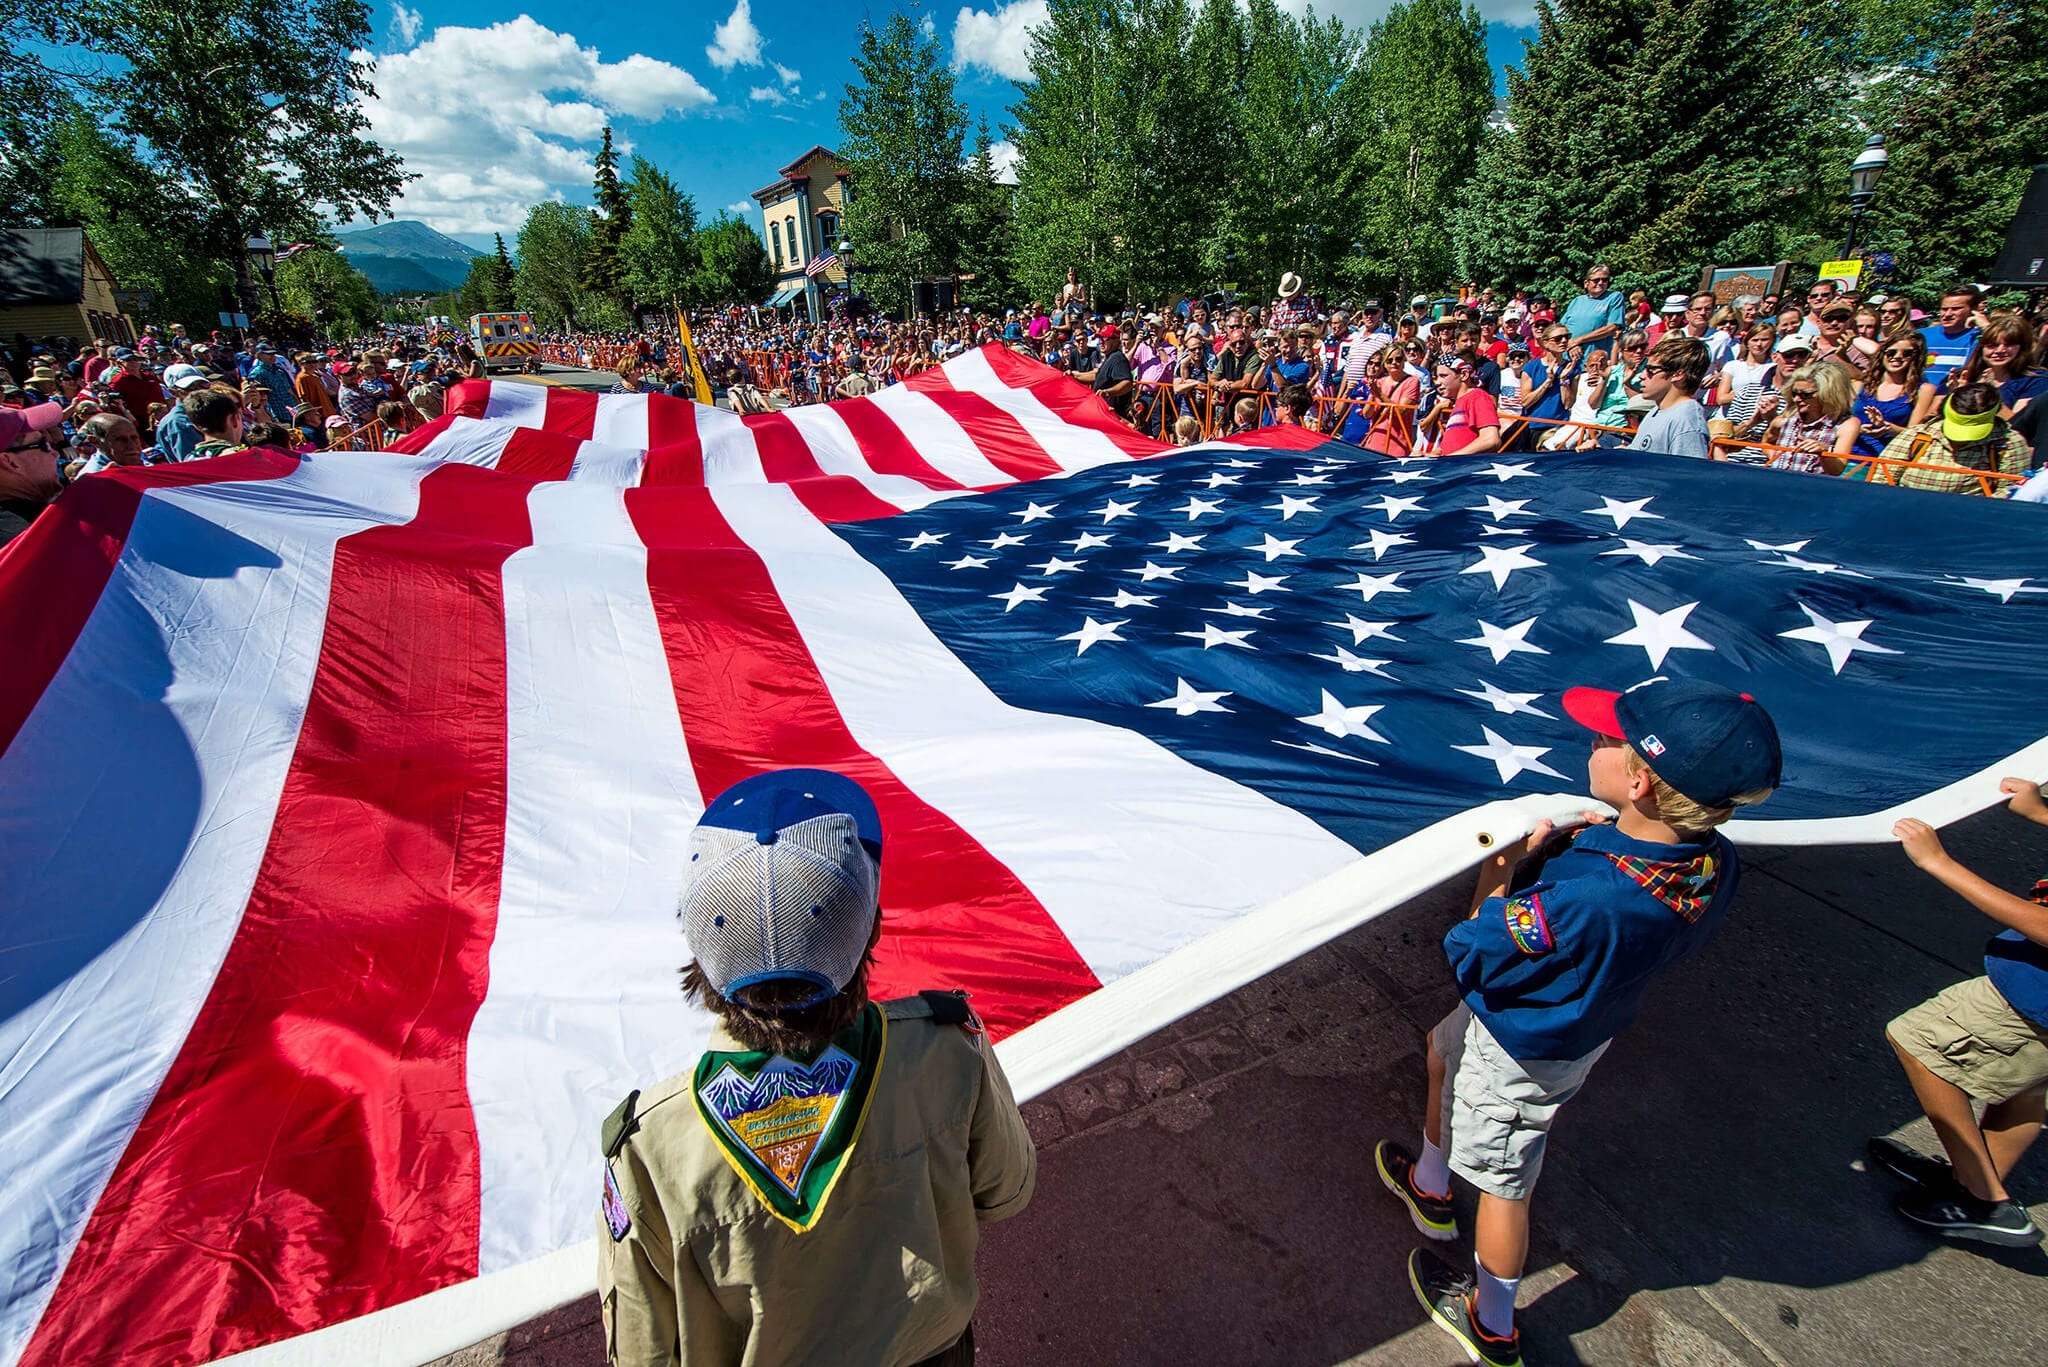 Boys Scouts at Breckenridge 4th of July Parade